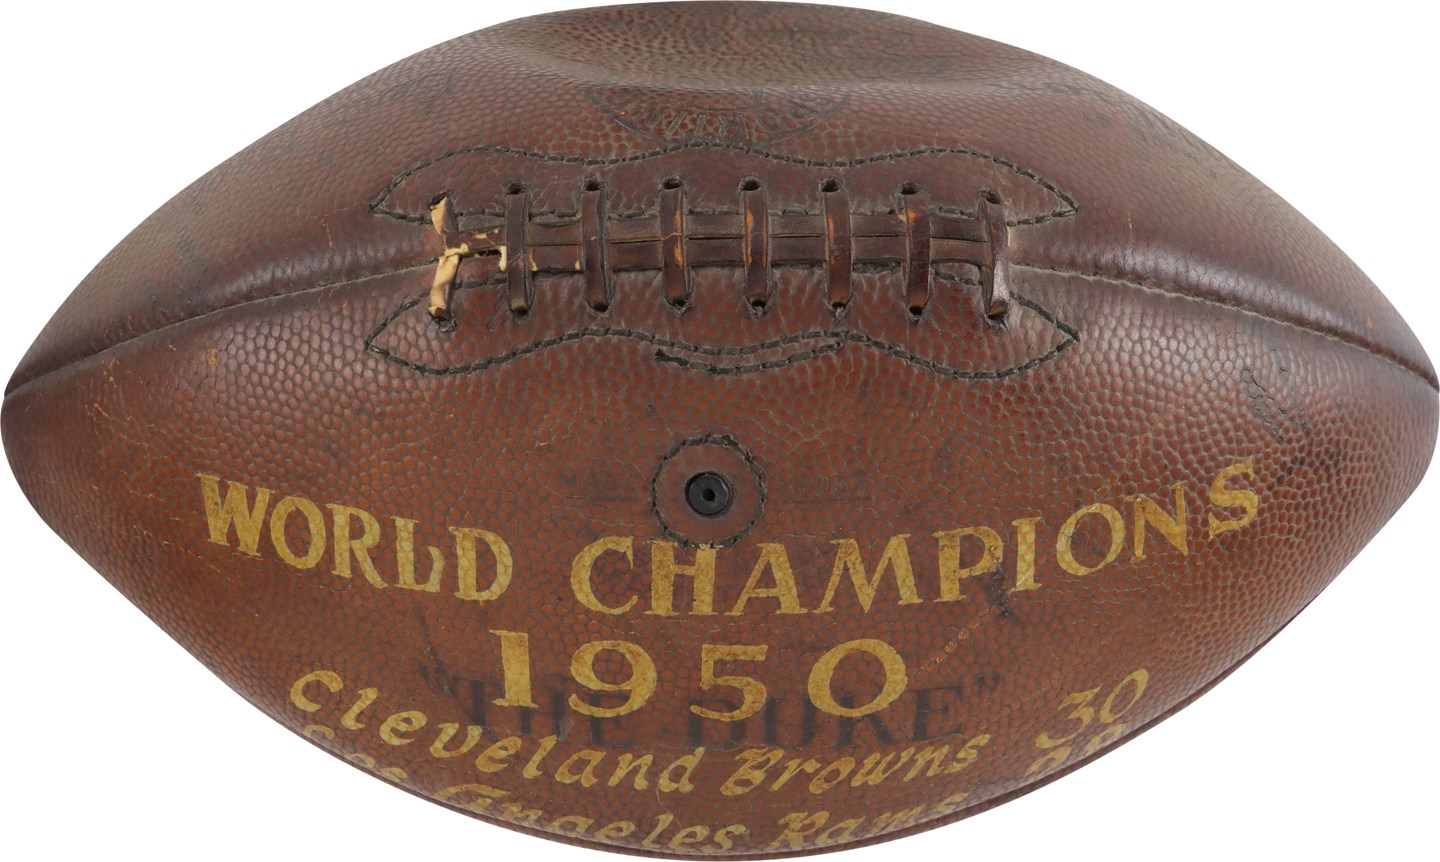 - 1950 NFL Championship Game Ball - Browns vs. Rams - Cleveland's 1st NFL Championship! - Mac Speedie Collection